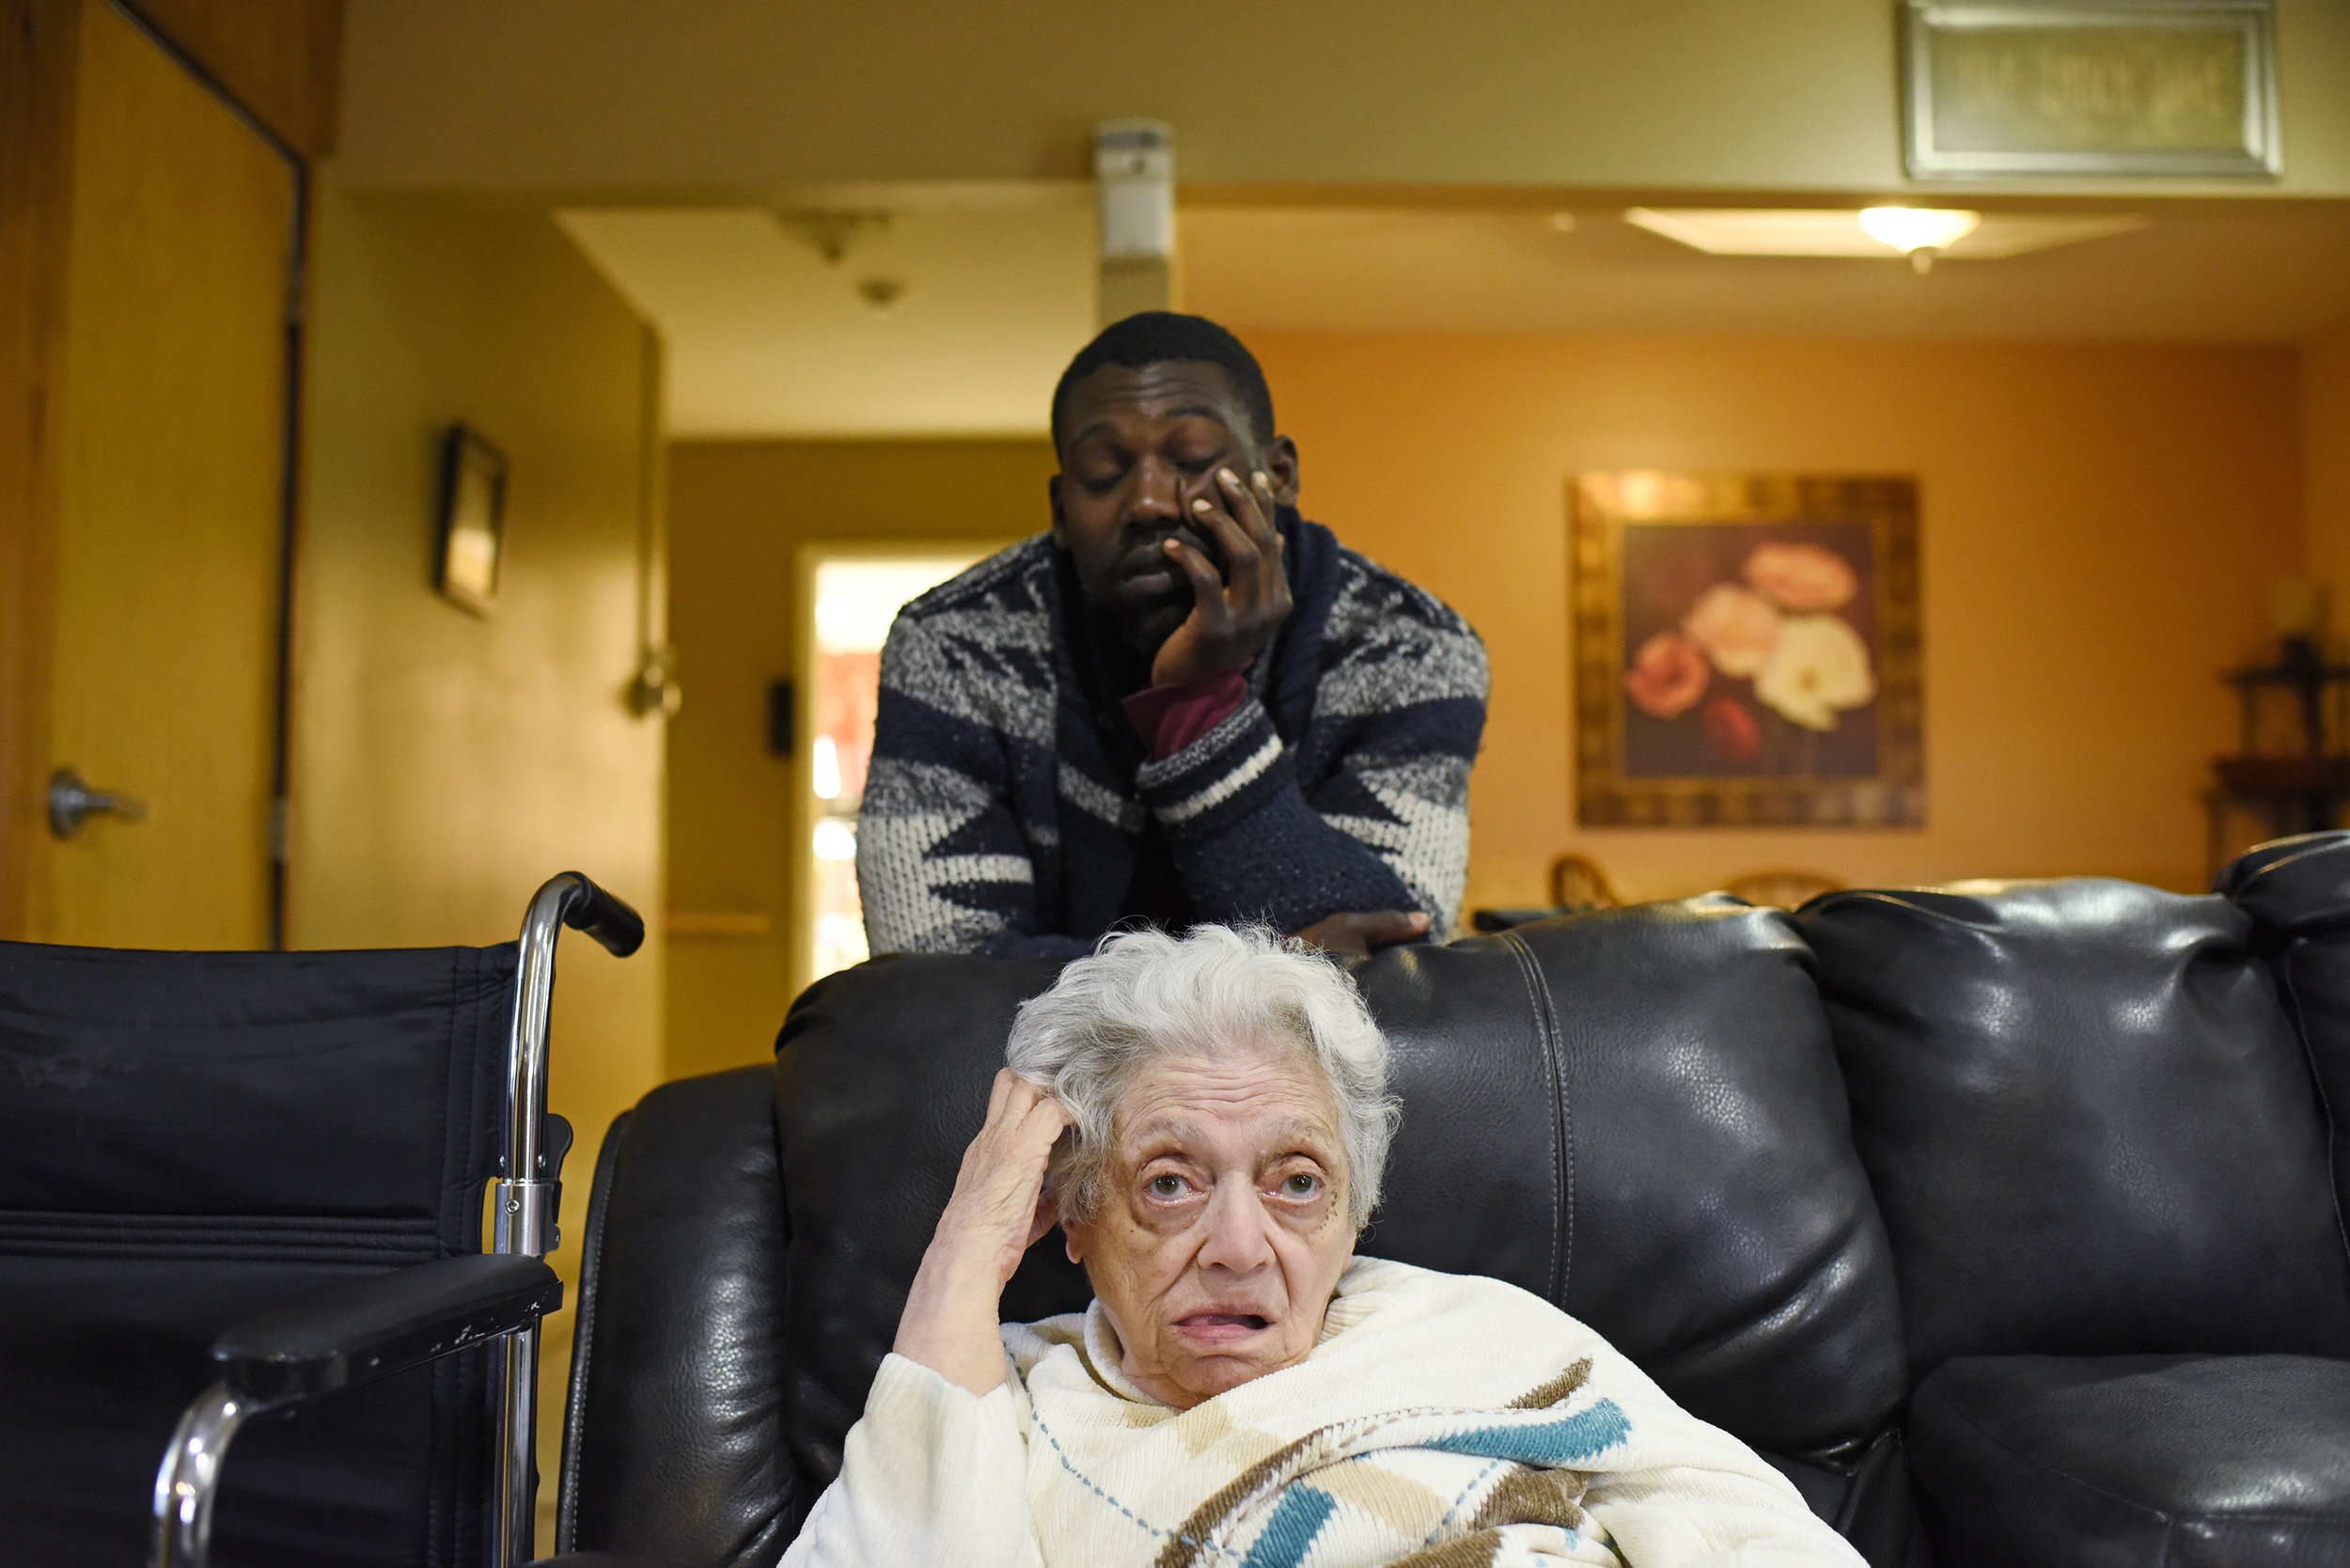  Relief day service provider, Maurice Thomson (29), sits behind Evelyn Vius (83) at a Sullivan Arc residential house in Woodridge, New York on Oct. 9, 2016. (Courtney Pedroza/Eddie Adams Workshop) 